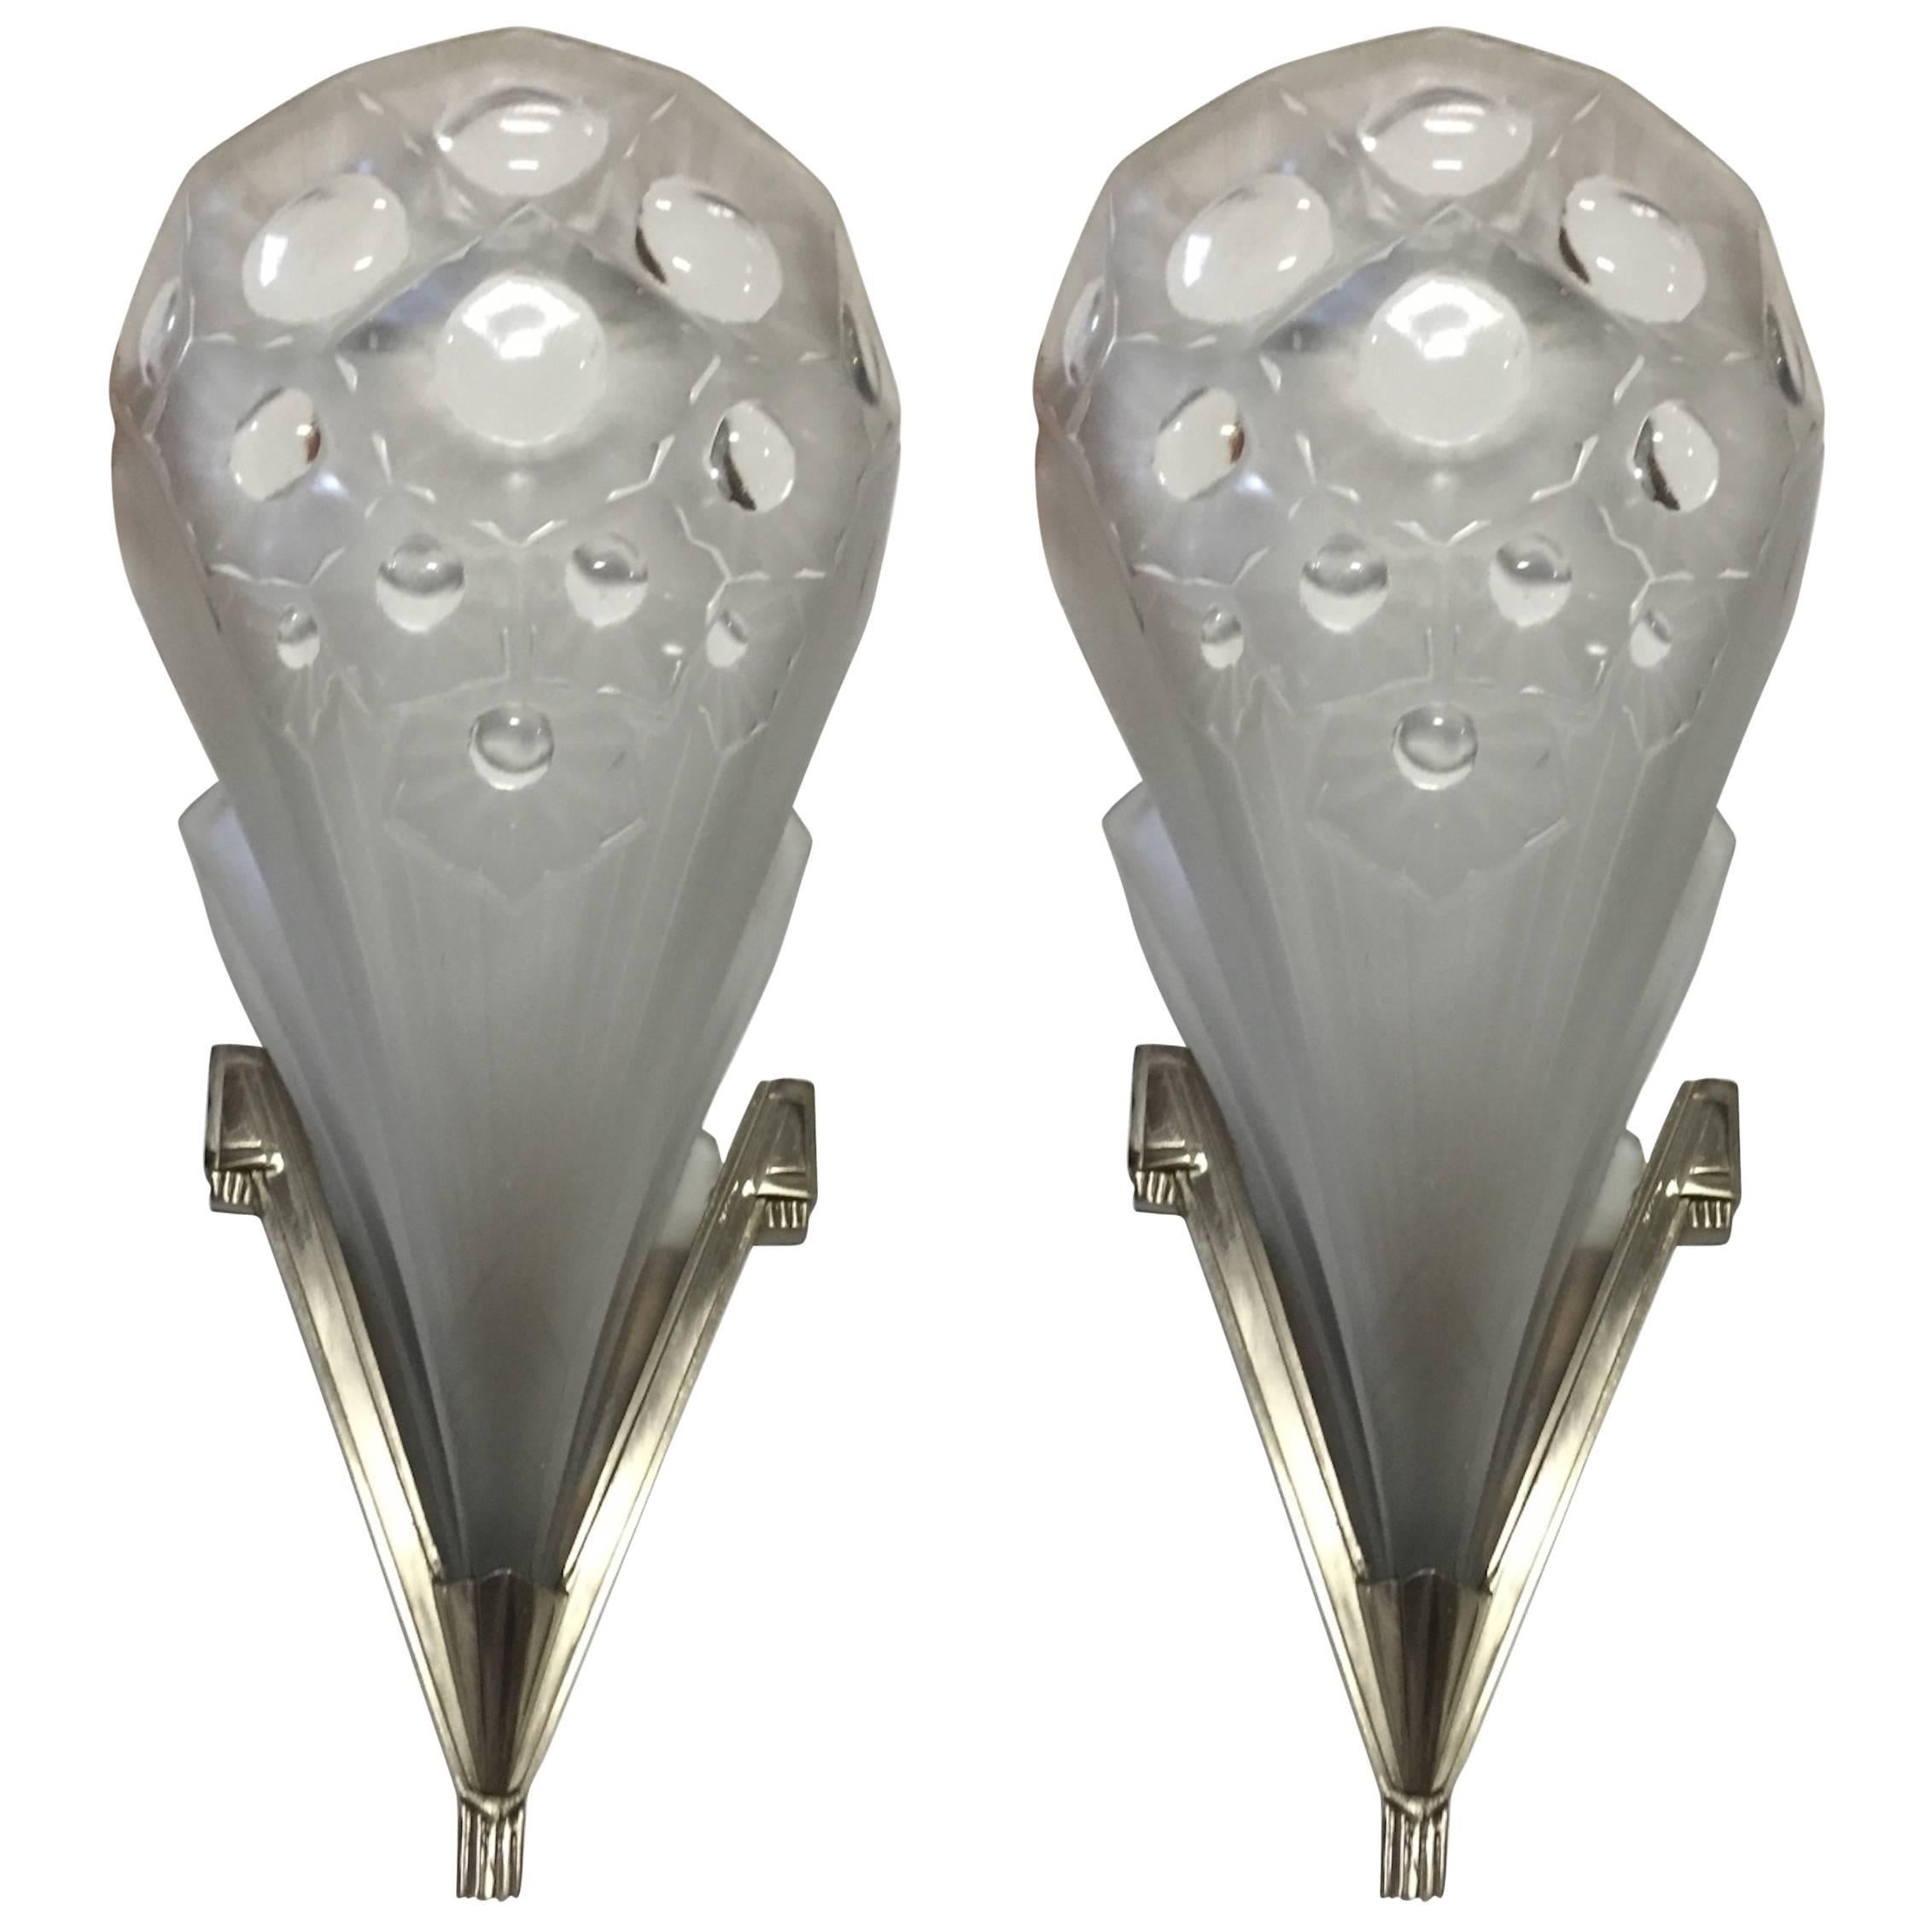 Pair of French Art Deco Wall Sconces Signed by Muller Freres